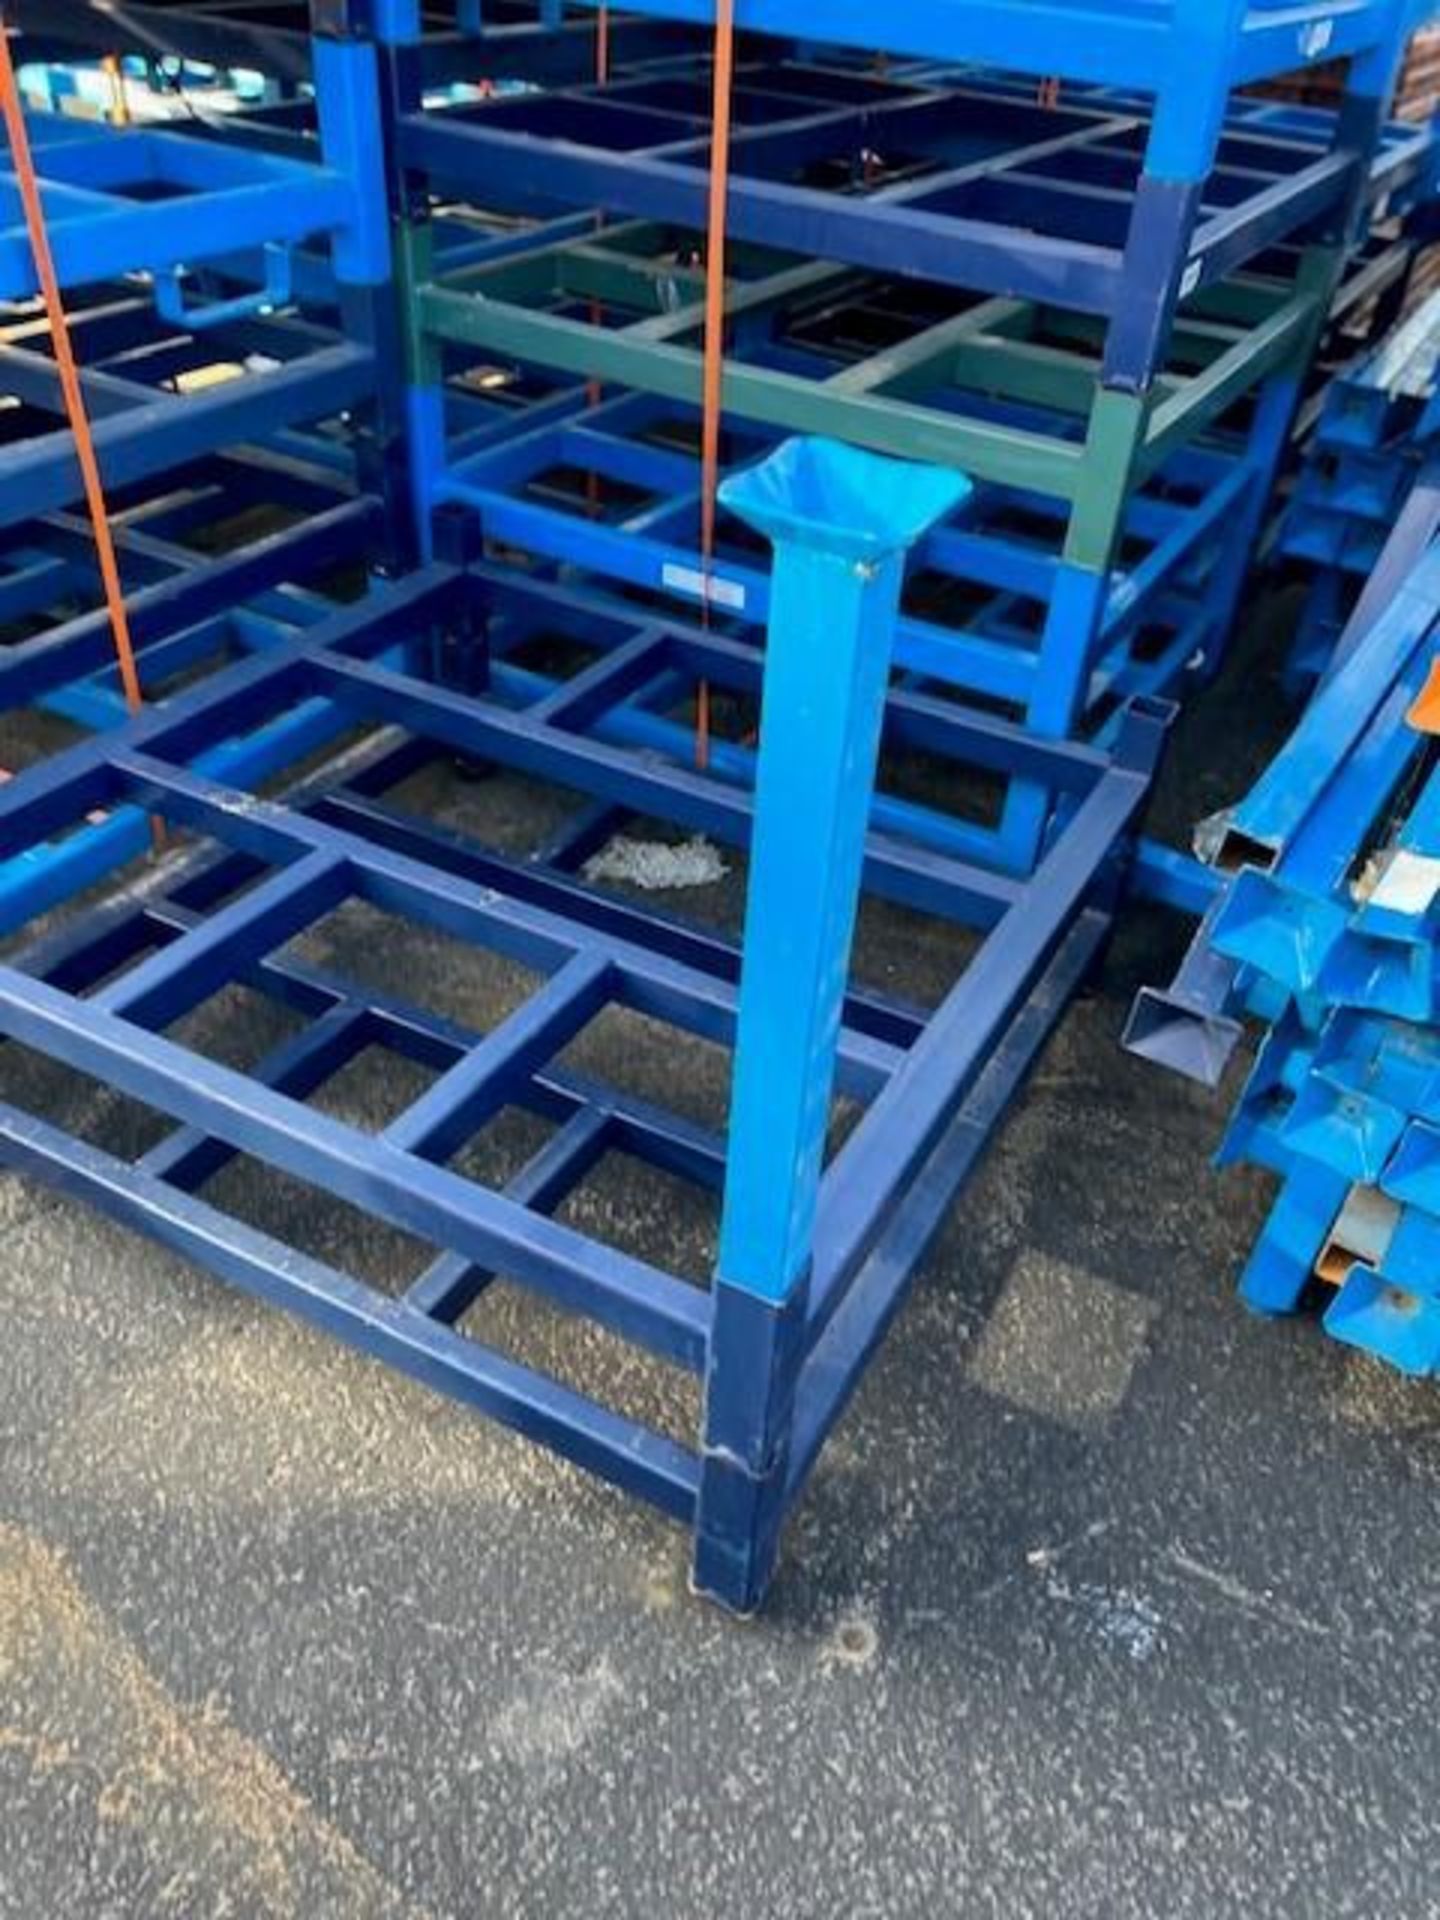 (150X) USED STACK RACK 48" X 48" X 48" COLOR LIGHT BLUE , LOCATION: 13770 W. PEORIA AVE, SURPRISE, A - Image 2 of 2